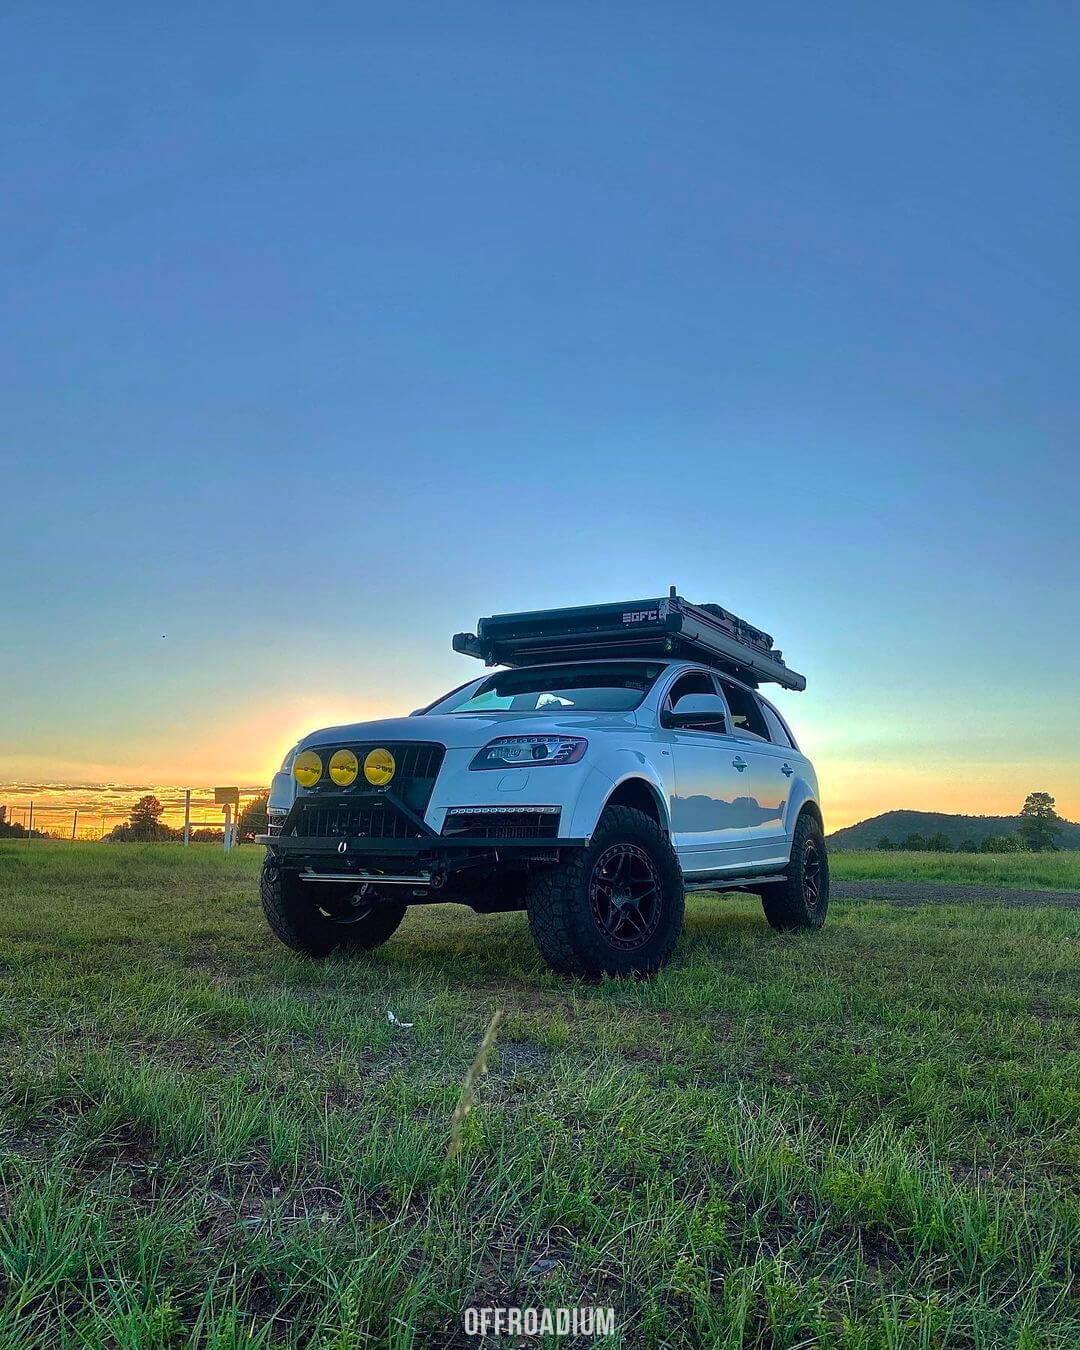 Lifted Audi Q7 with a roof rack and offroad mods